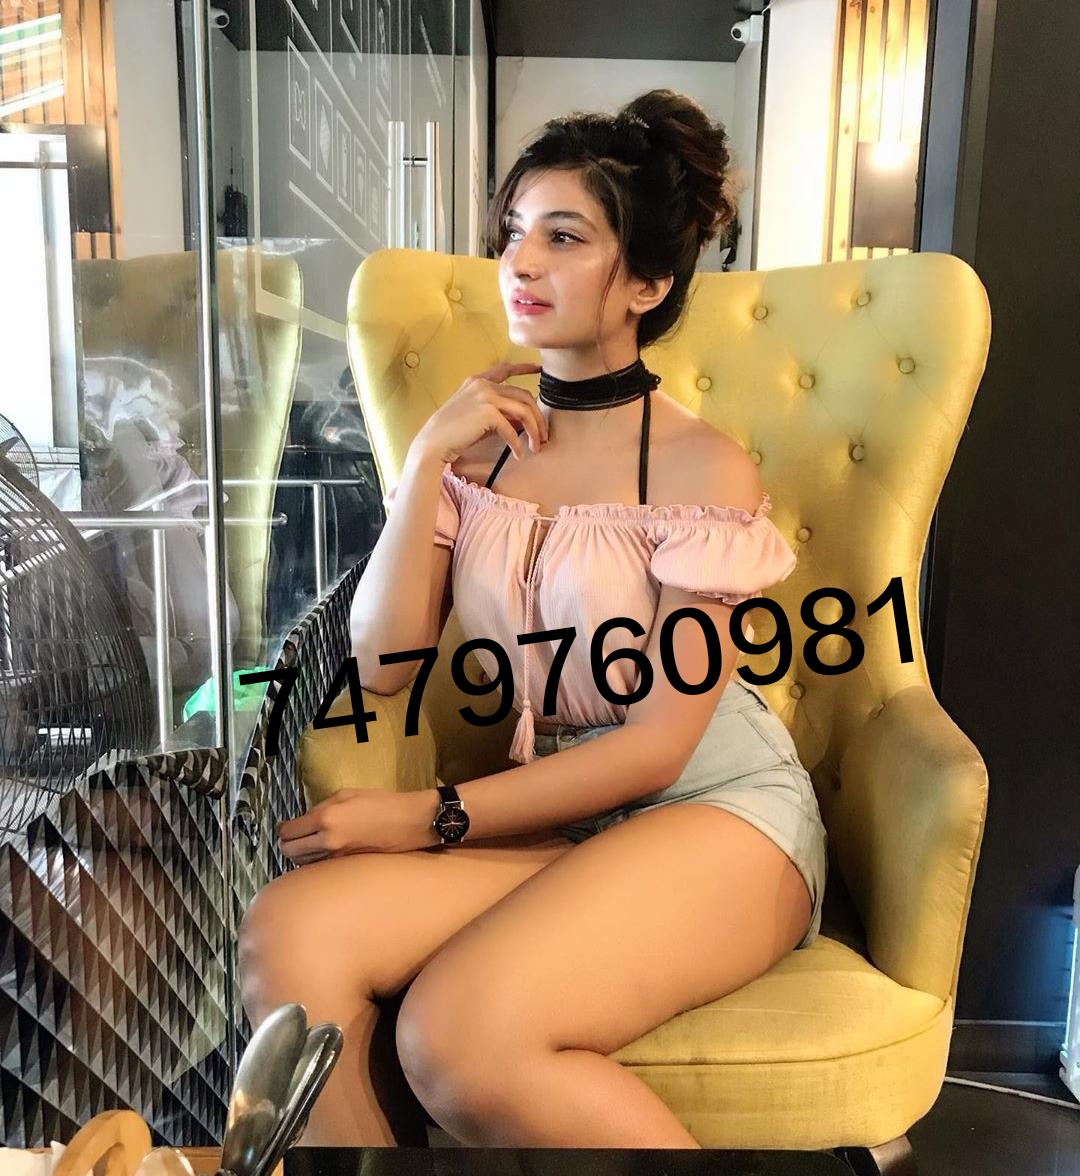 RANIKHET Low Price CASH PAYMENT Hot Sexy call College Girl Escort